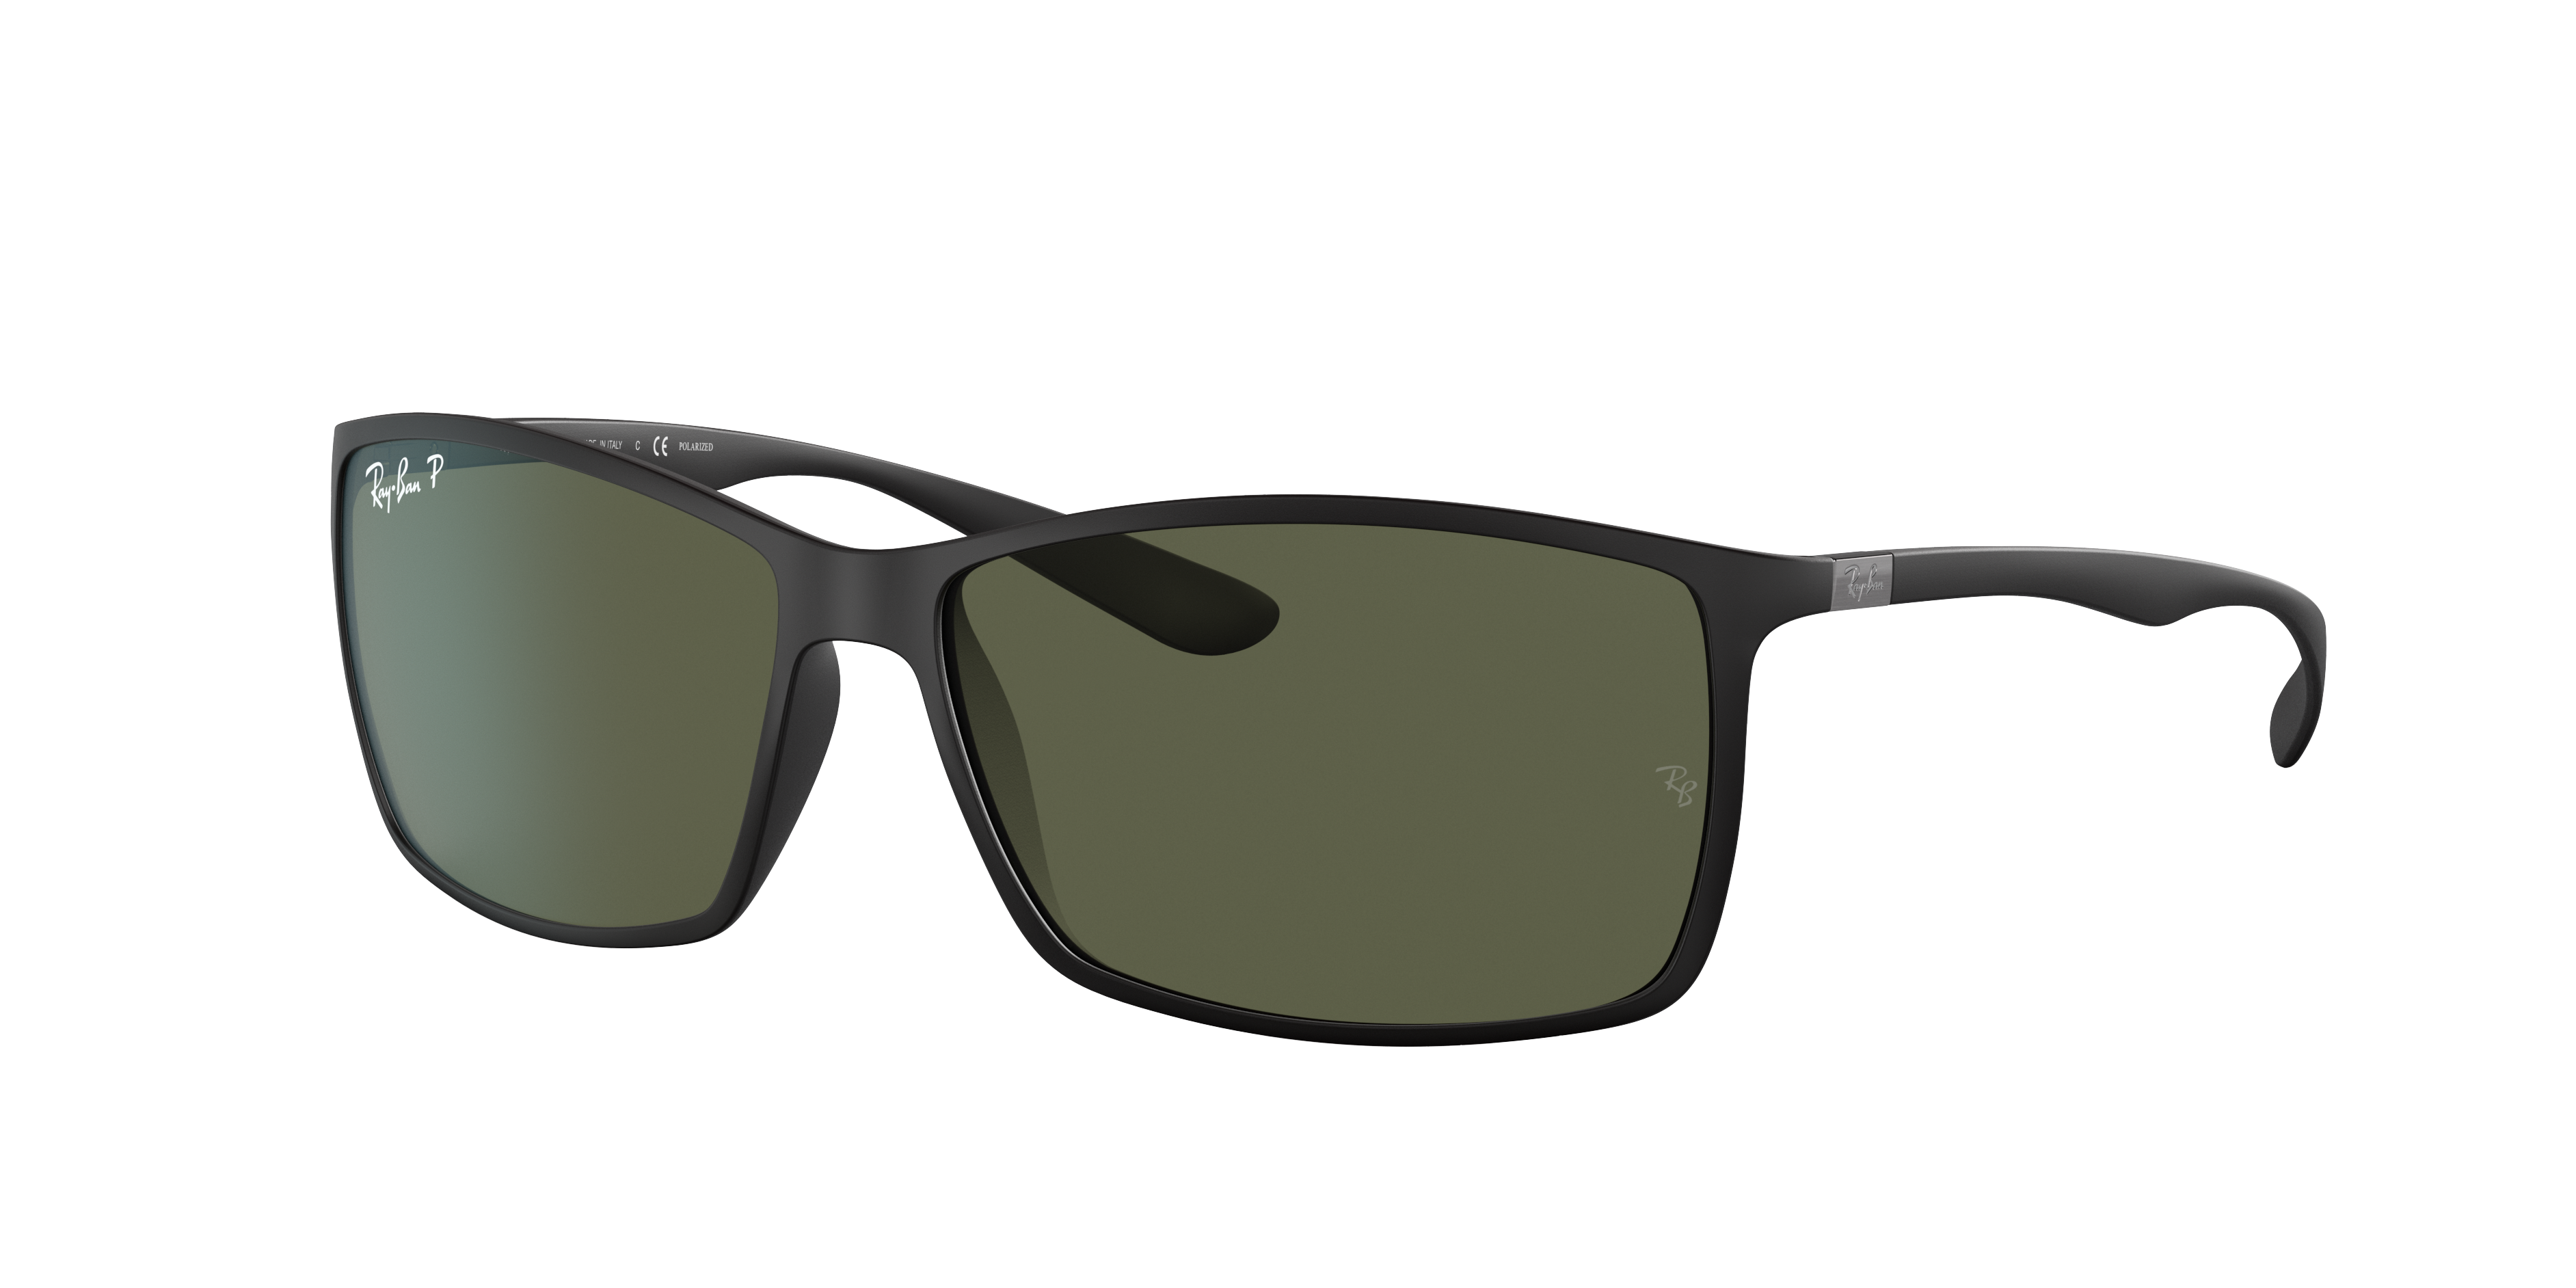 Rb4179 Sunglasses in Black and Green | Ray-Ban®